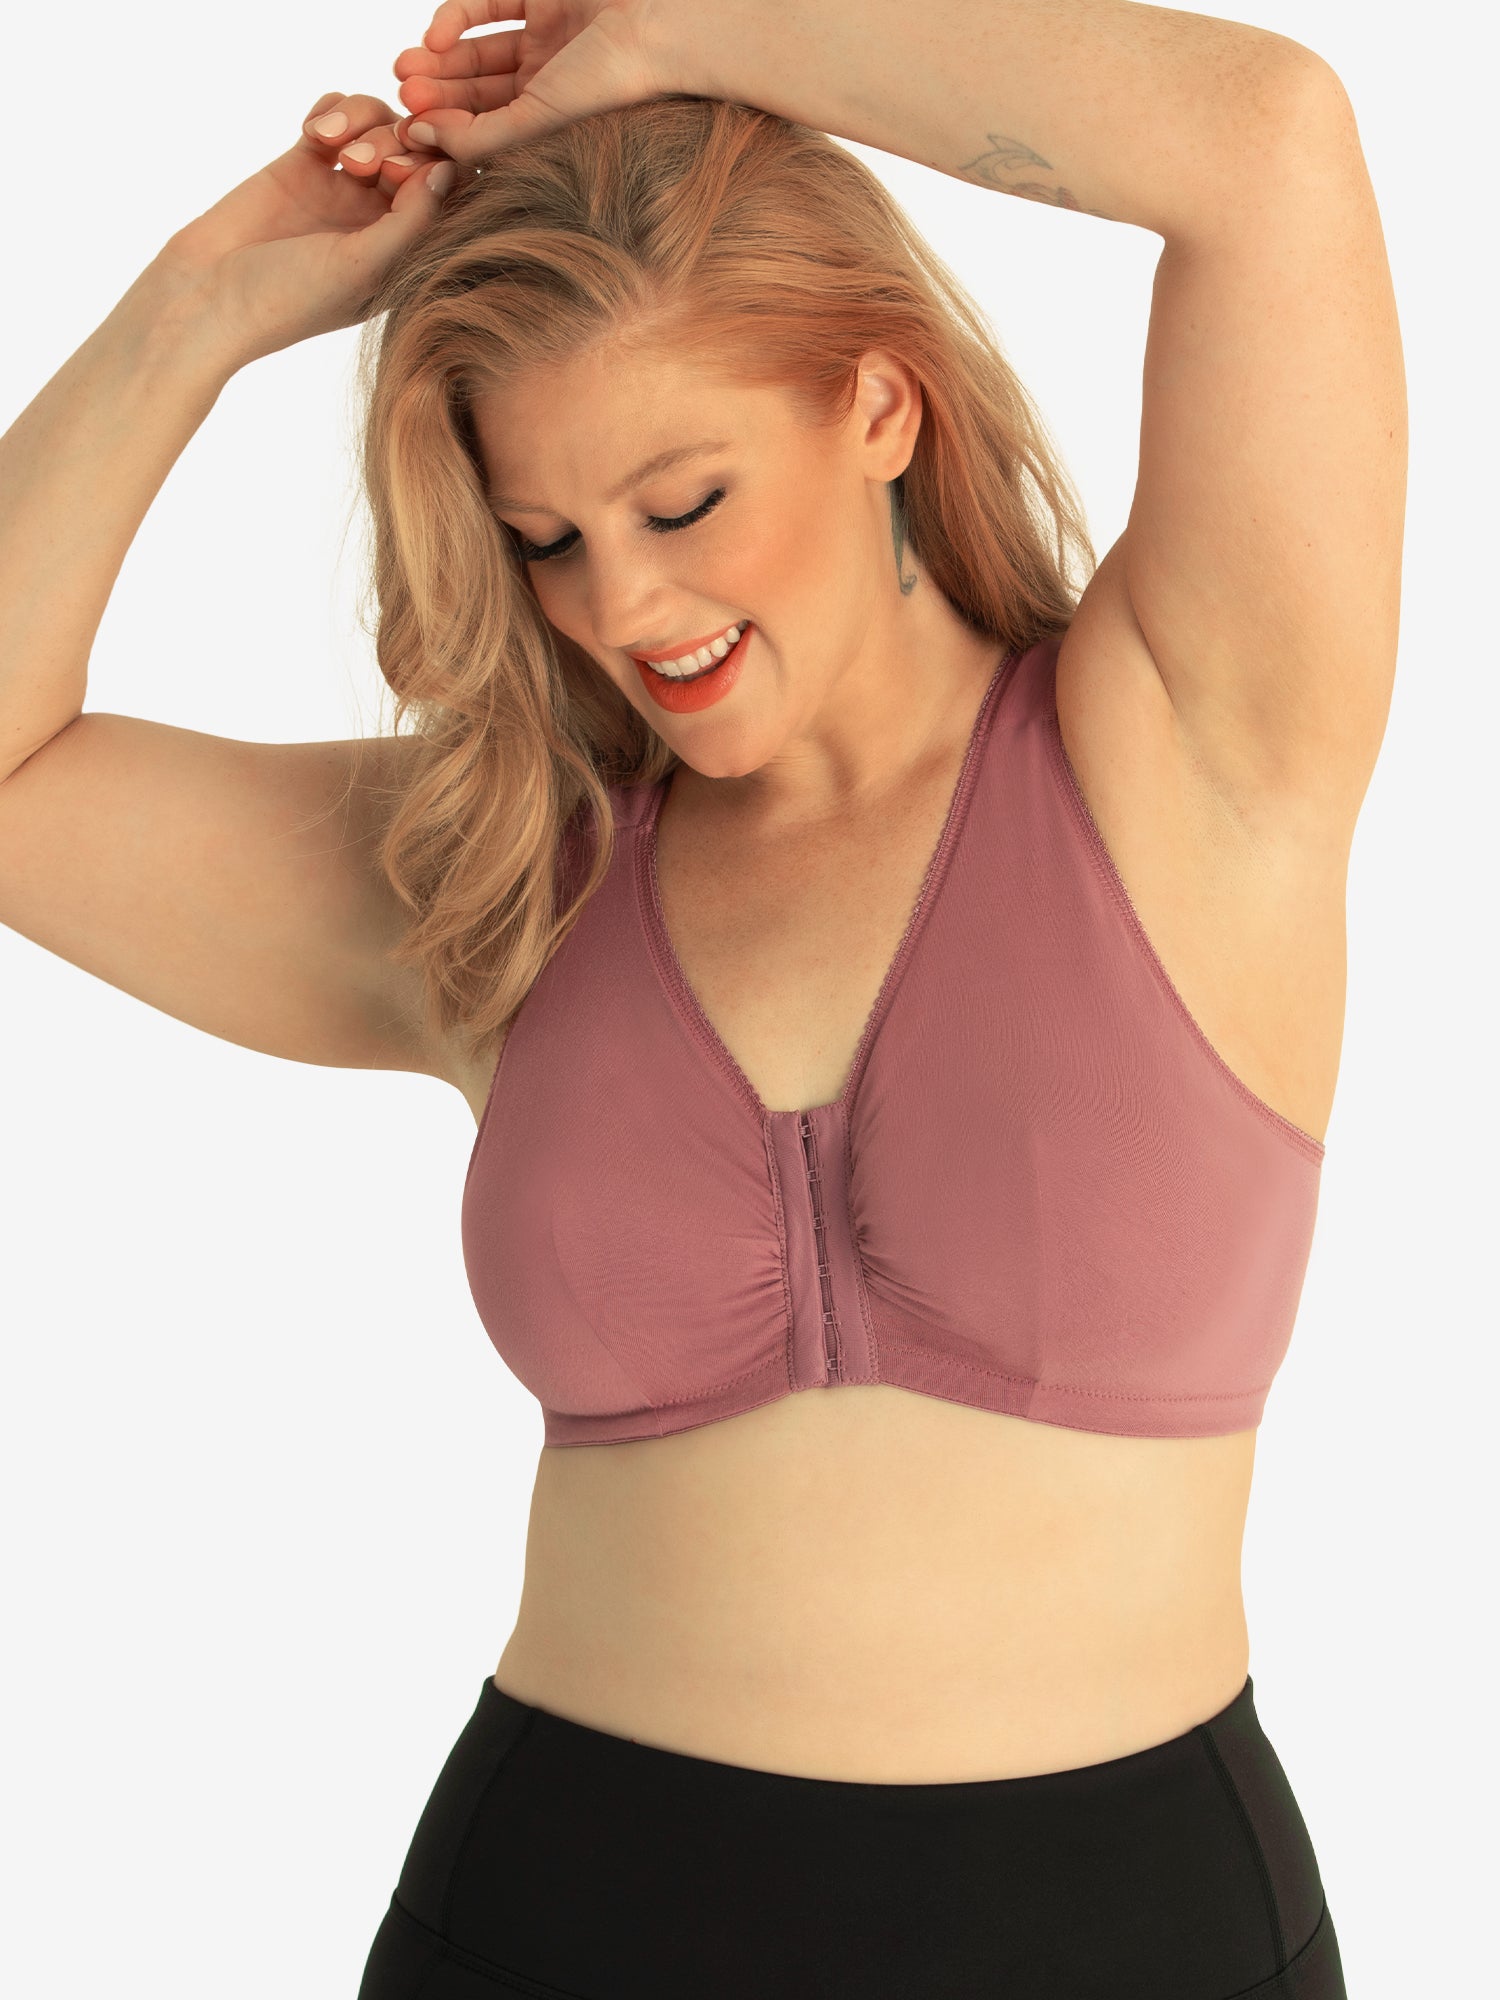 Buy Leading Lady Pack Of 3 Solid Non Wired Non Padded T Shirt Bras M  CONCENT 3 - Bra for Women 9783971